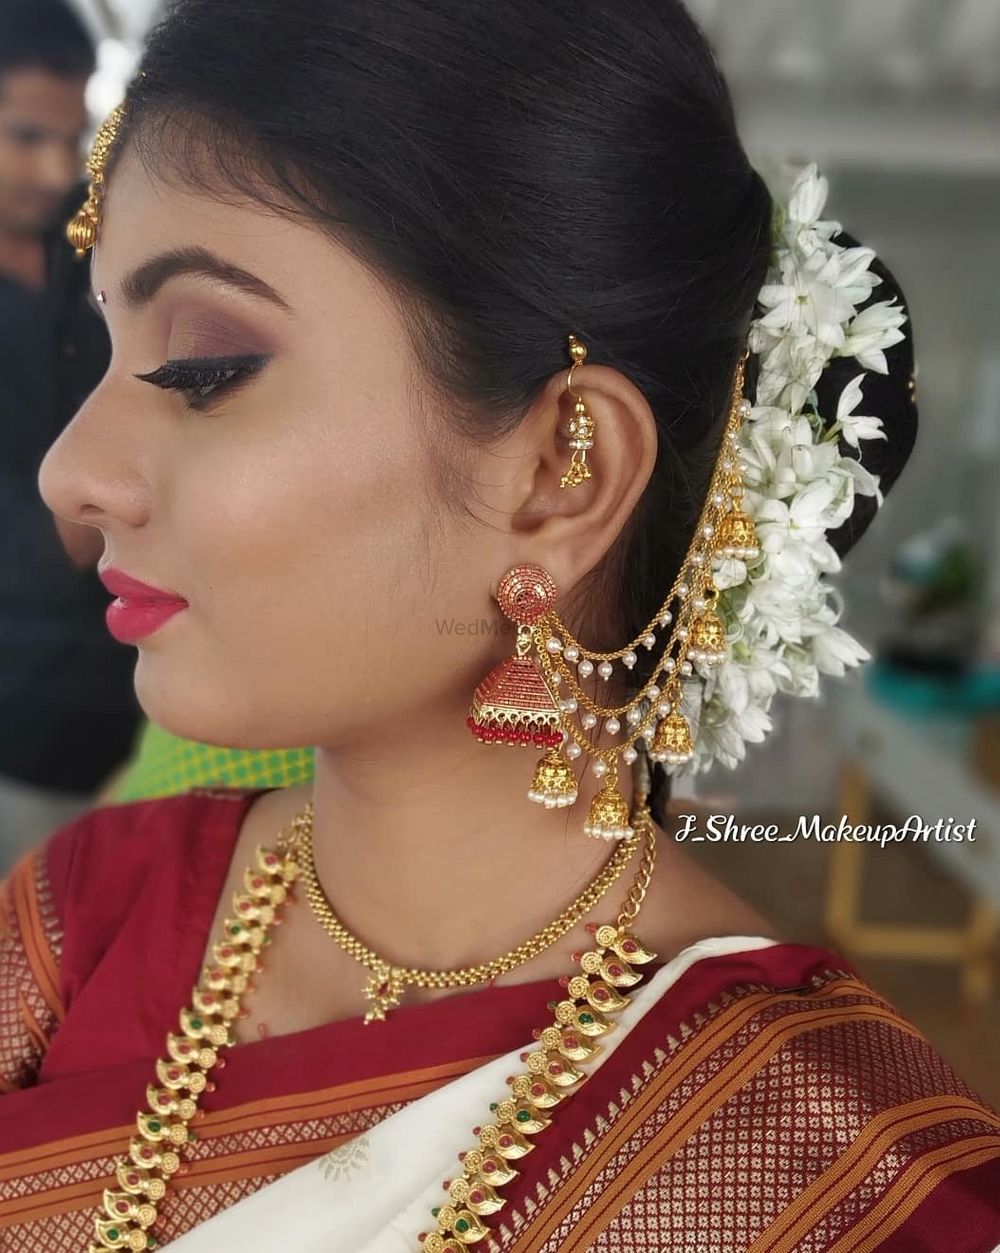 Photo From south indian bride - By Jshree Makeup Artist